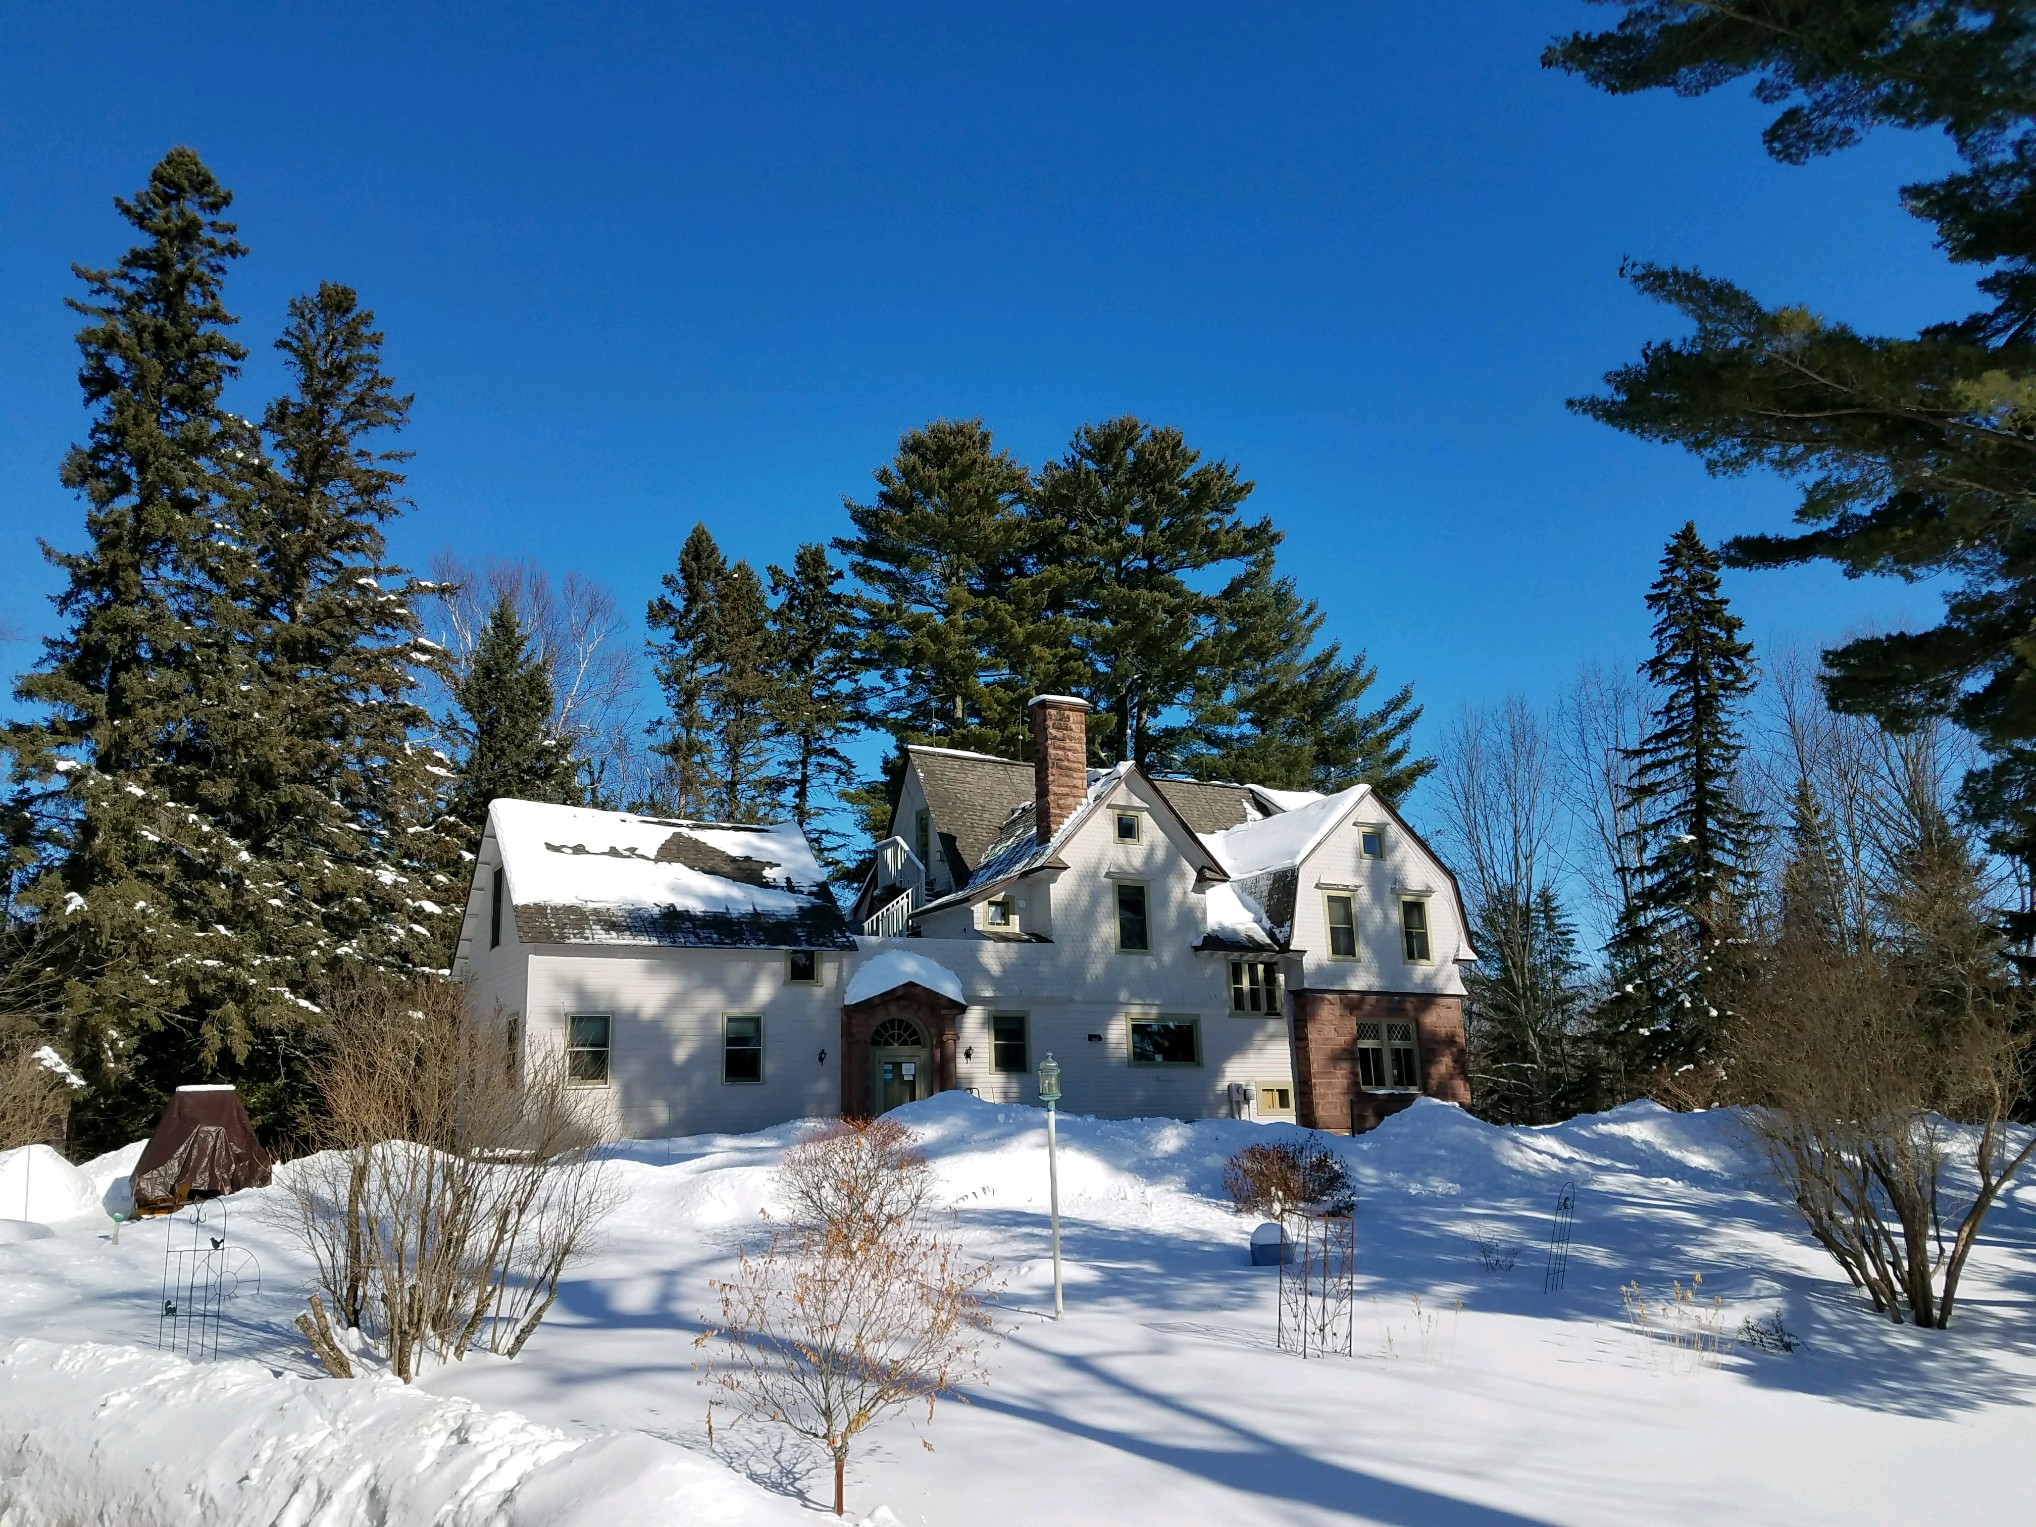 Main House on snow covered lot with towering green pine trees and deep blue sky